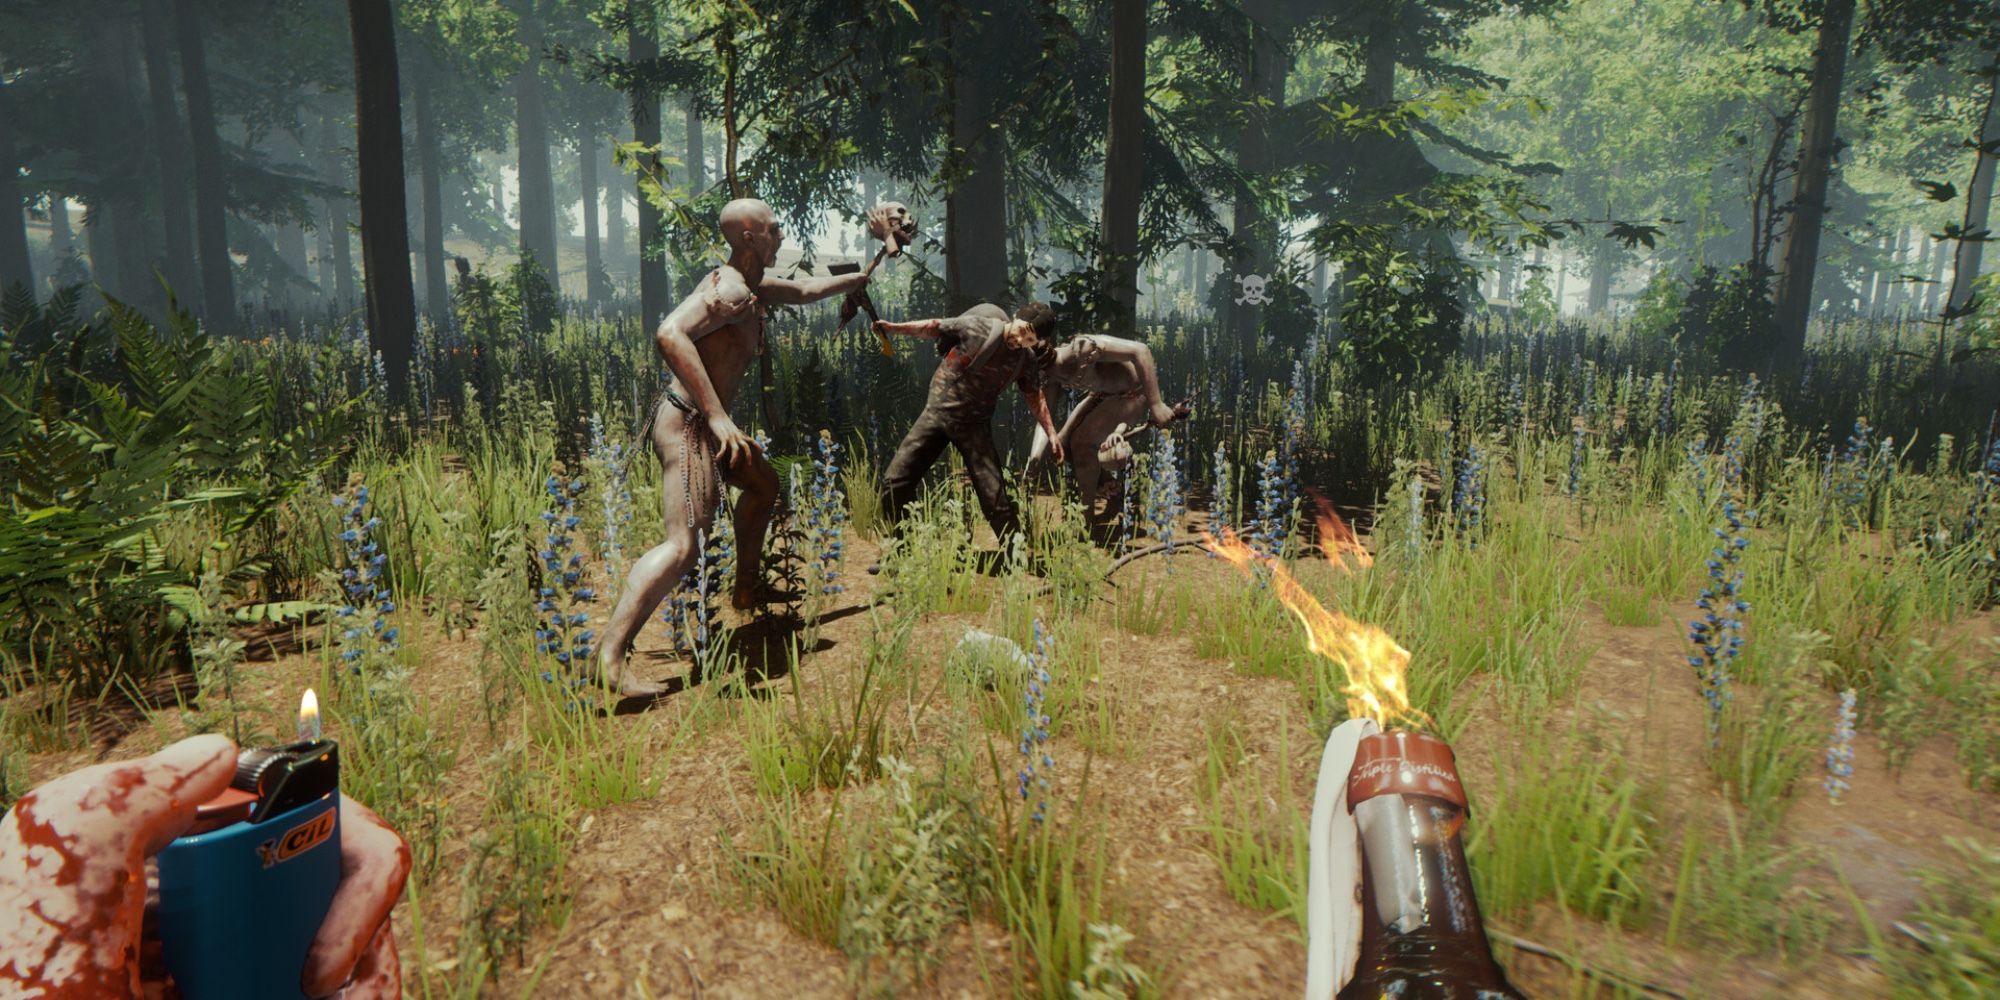 the character facing off against enemies in the forest